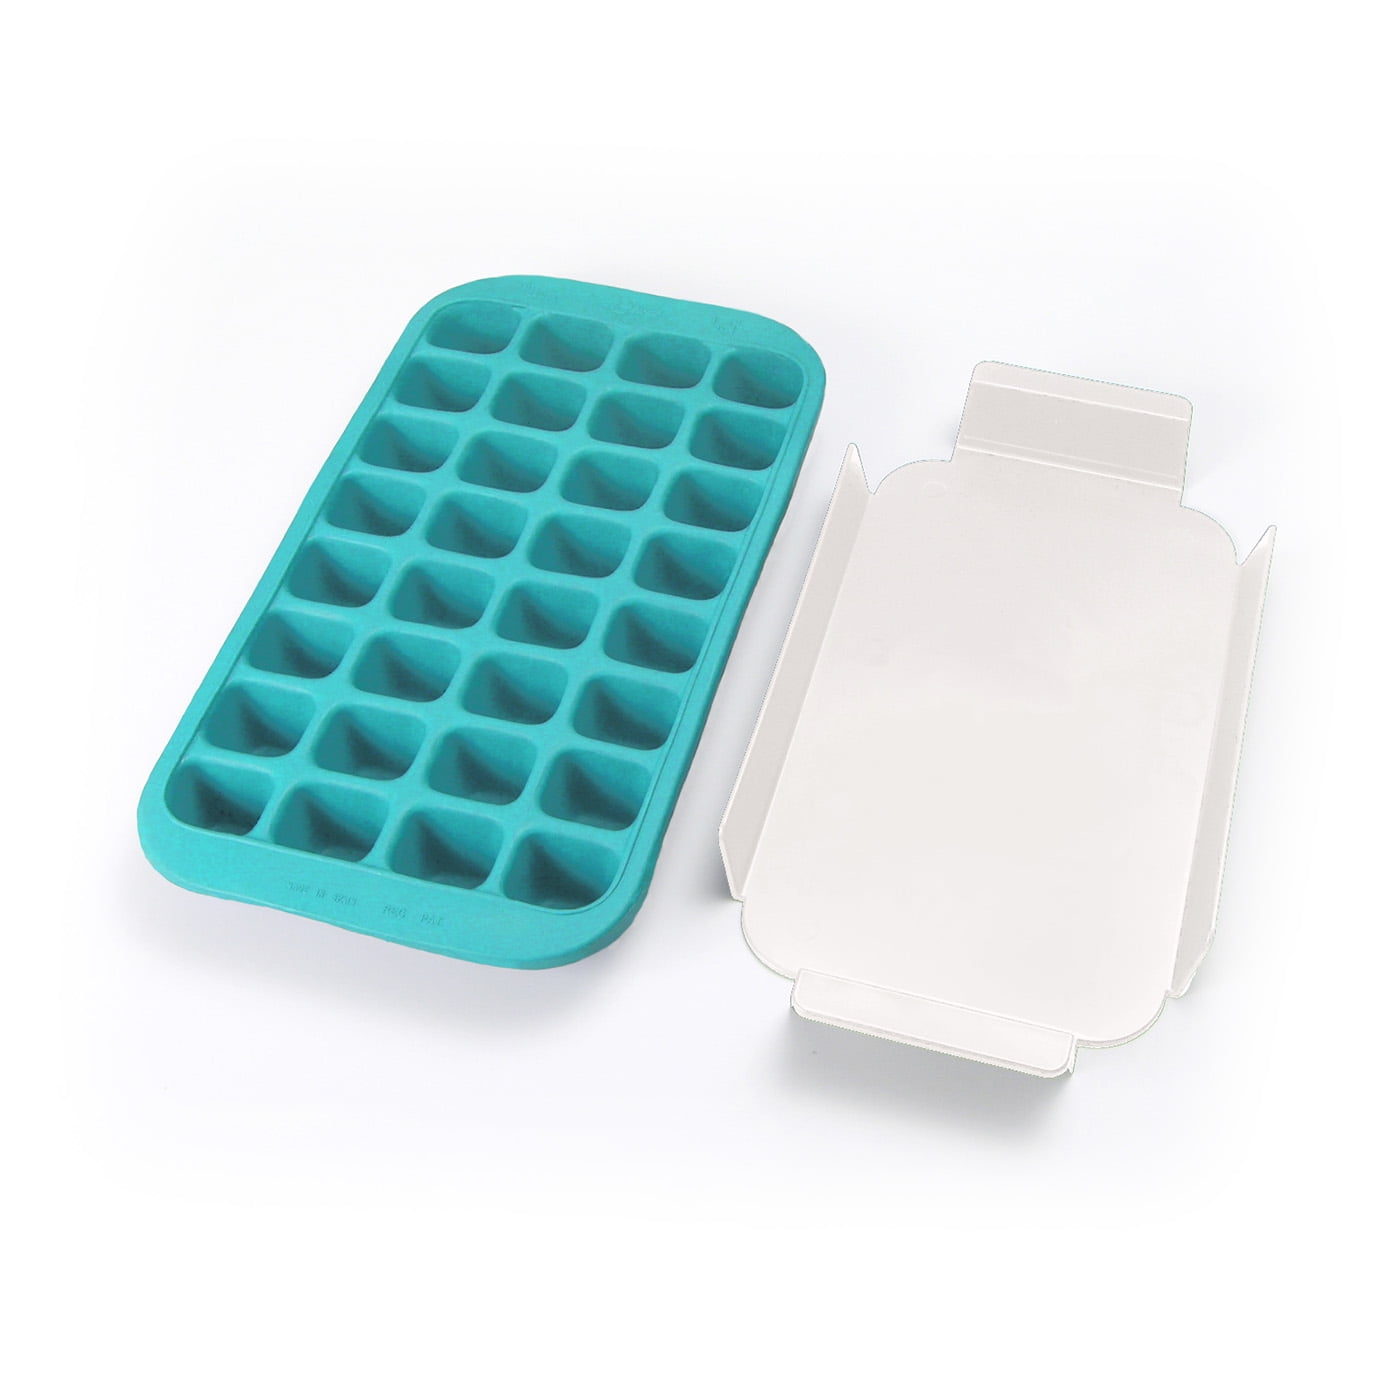 Oxo Covered Ice Cube Tray Large Cubes : Target